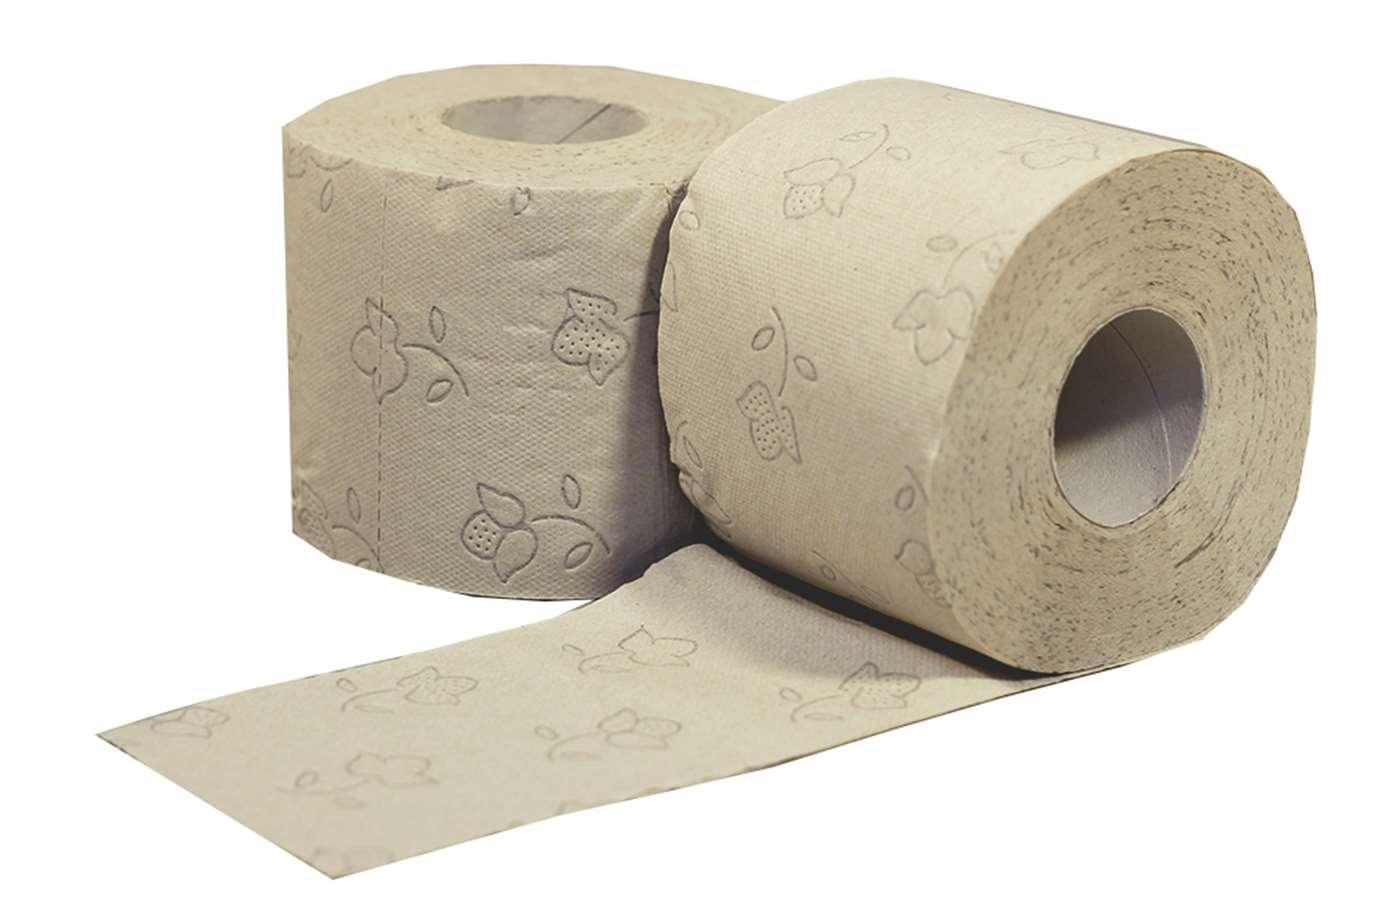 Eco Natural 250sht 3ply Havana Extra Soft Toilet Rolls - (pack of 6) - Vending Superstore